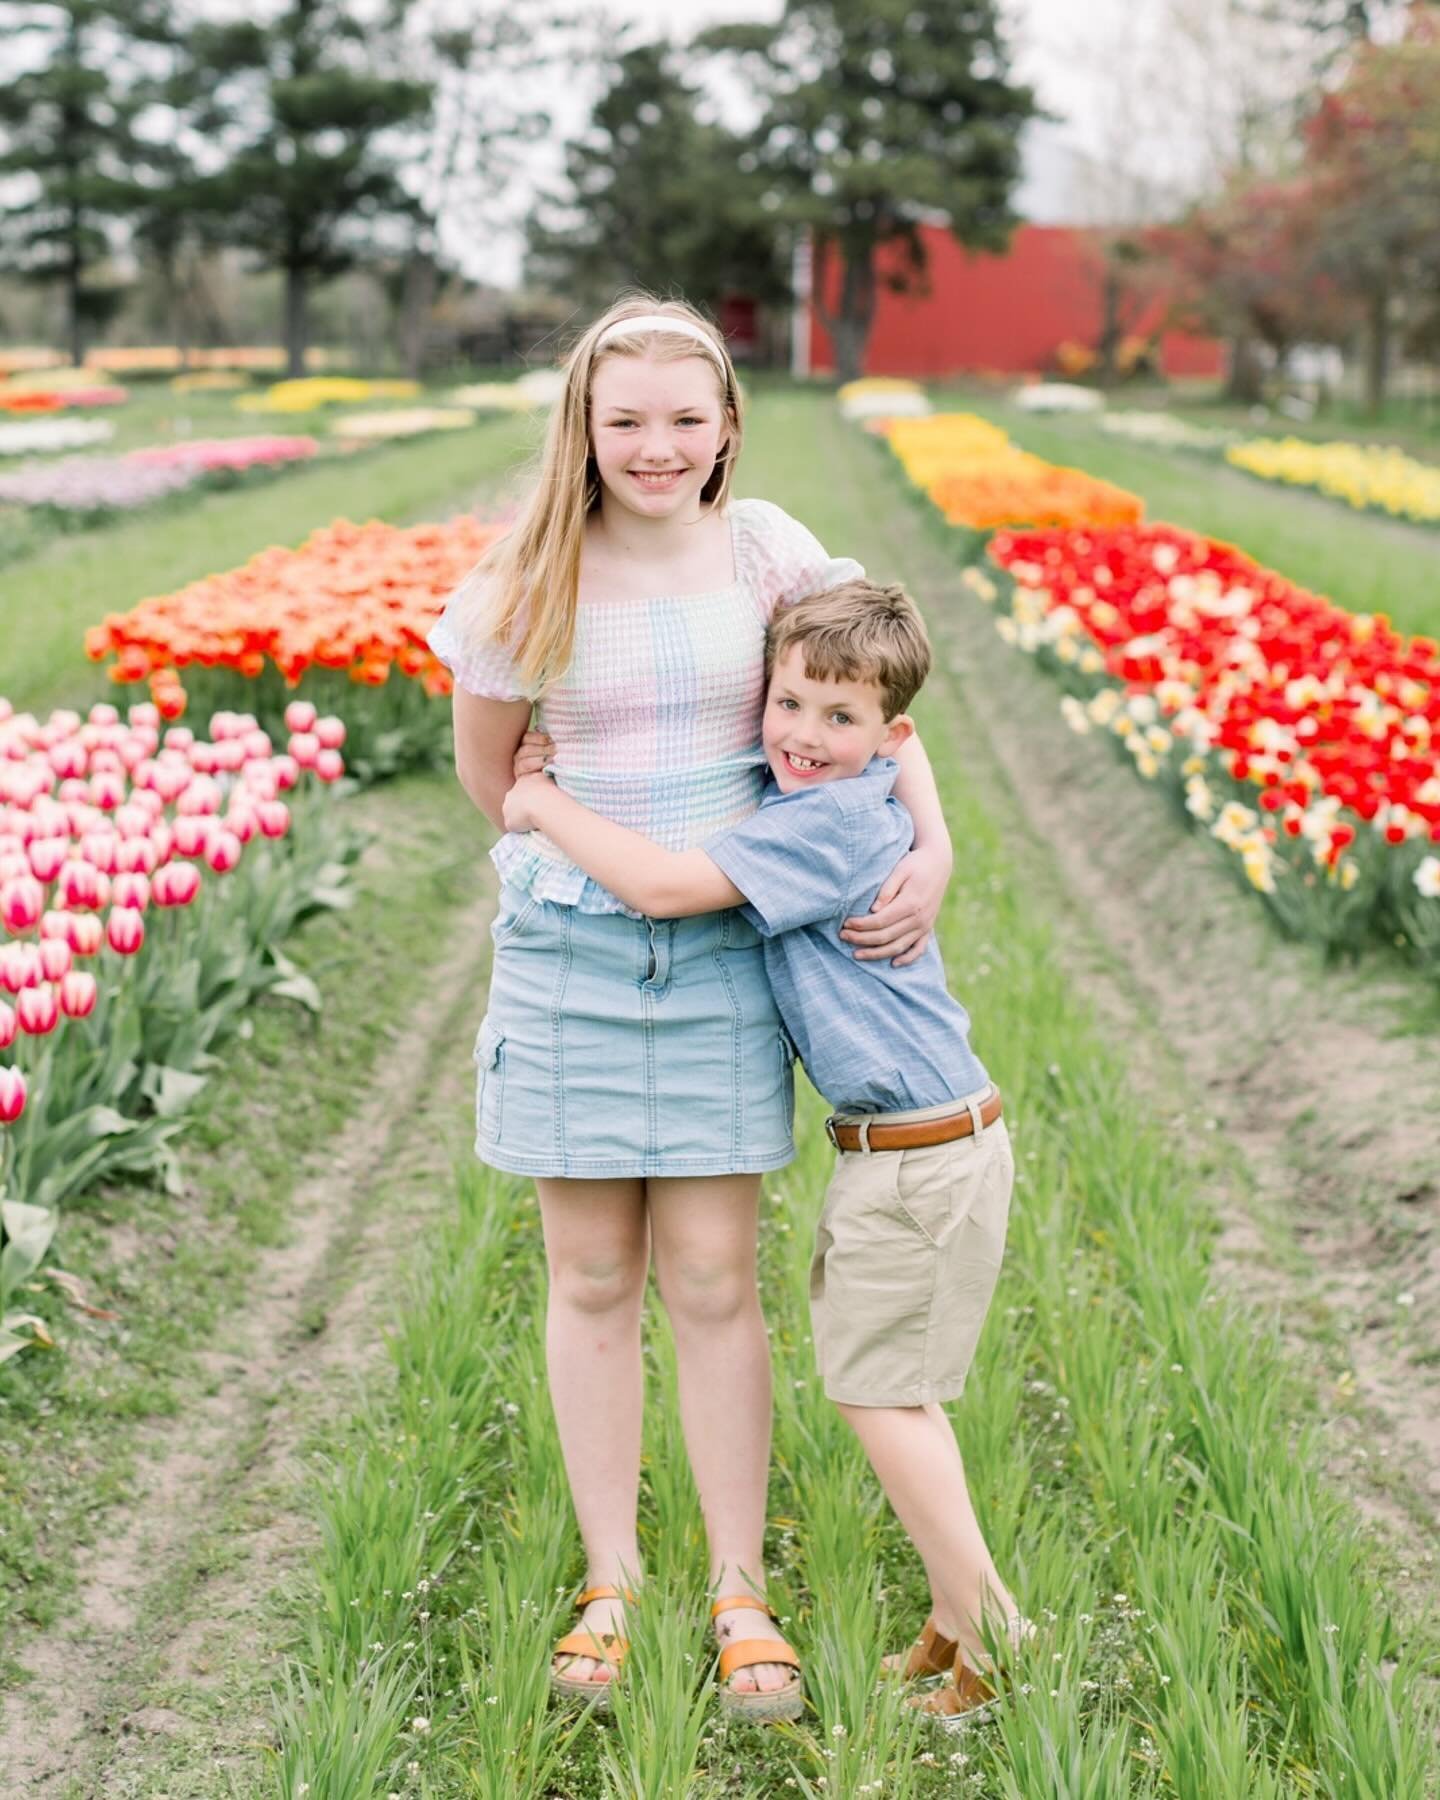 Highlights and a couple bloopers from a trip to the tulip garden. Tulip sessions are coming May 11-17. Grab the last few spots before they fill up!
#tulips🌷 #veldheertulipgarden #westmiphotographer #tulipsessions